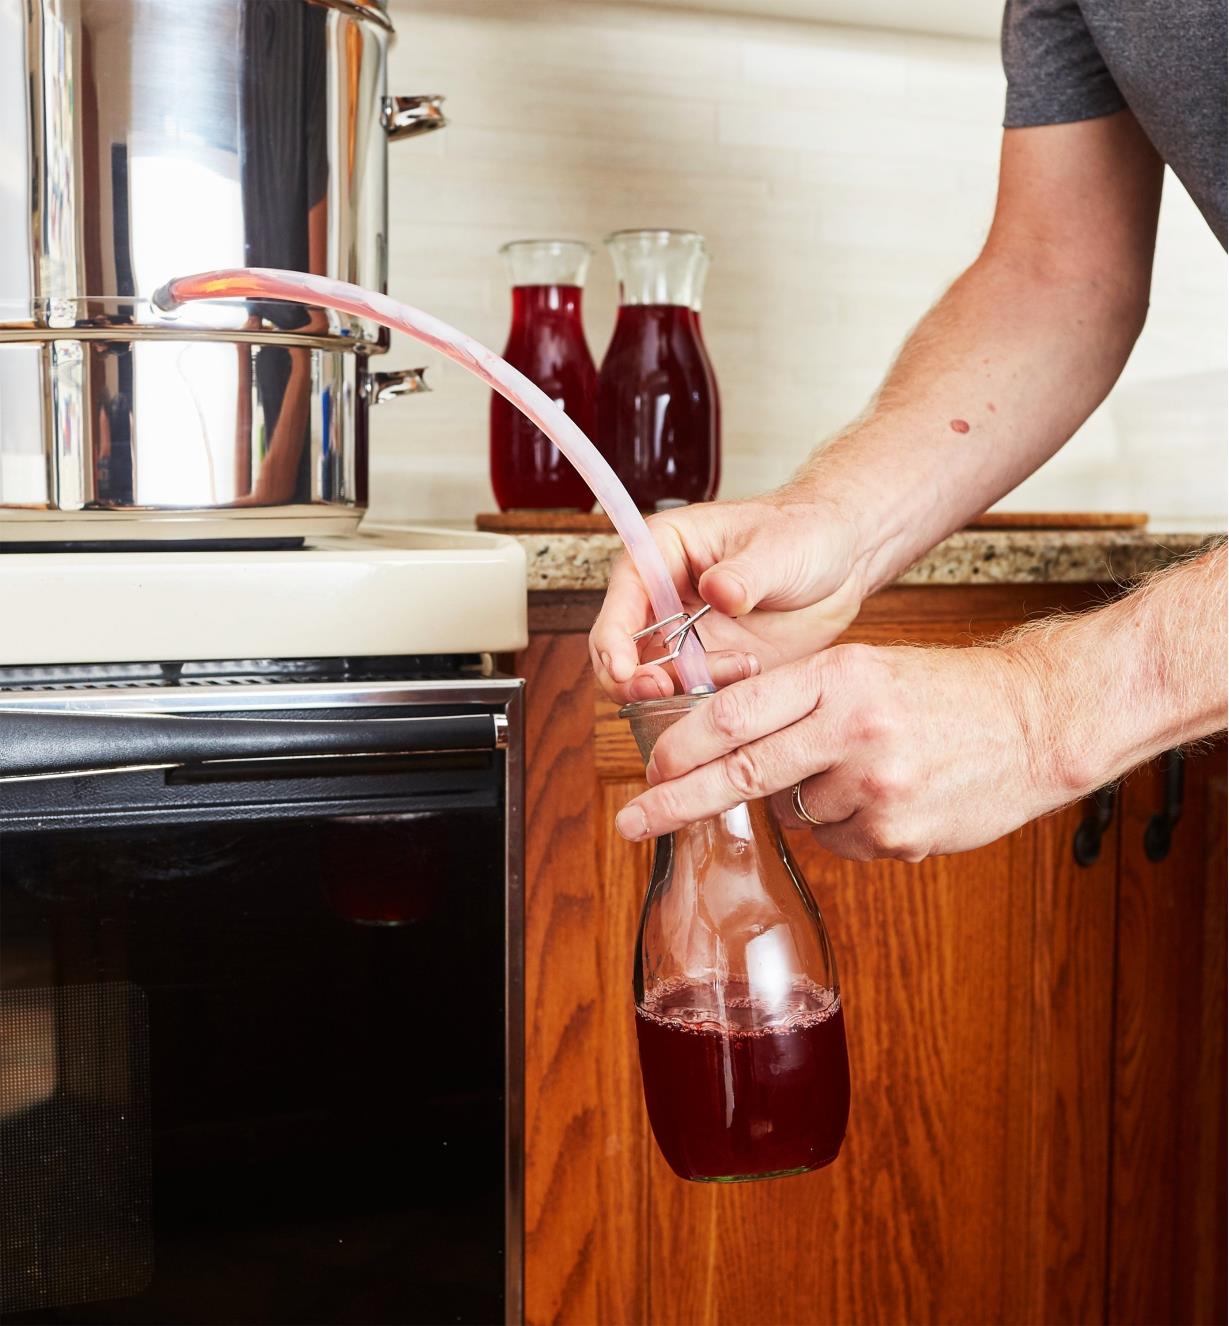 Juice being poured through a hose from a juicer into a glass bottle